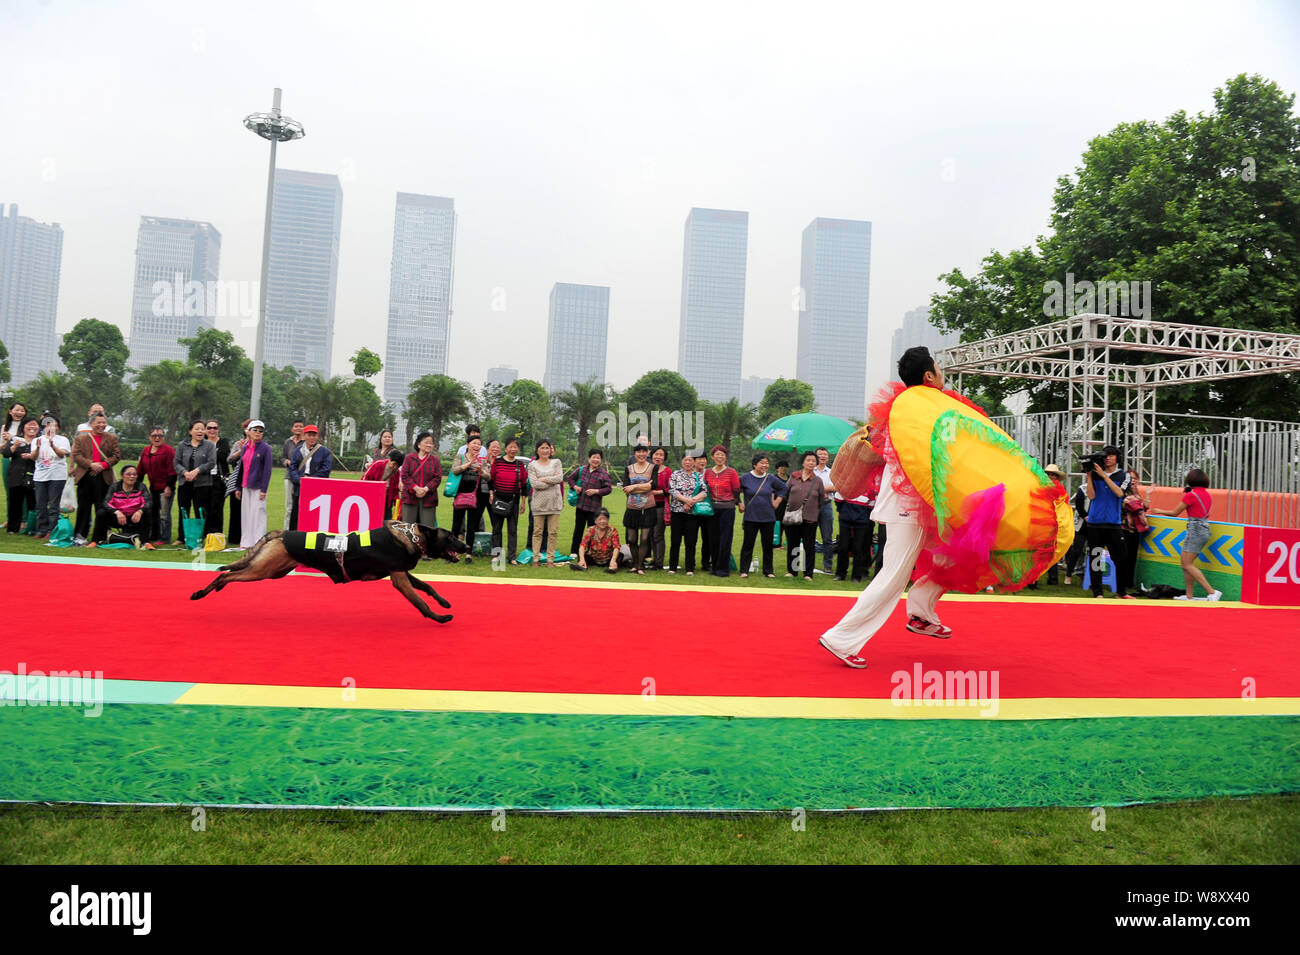 A dog chases a participant during a human vs dog race in Changsha city, central Chinas Hunan province, 16 May 2014.   China loves its themed marathons Stock Photo